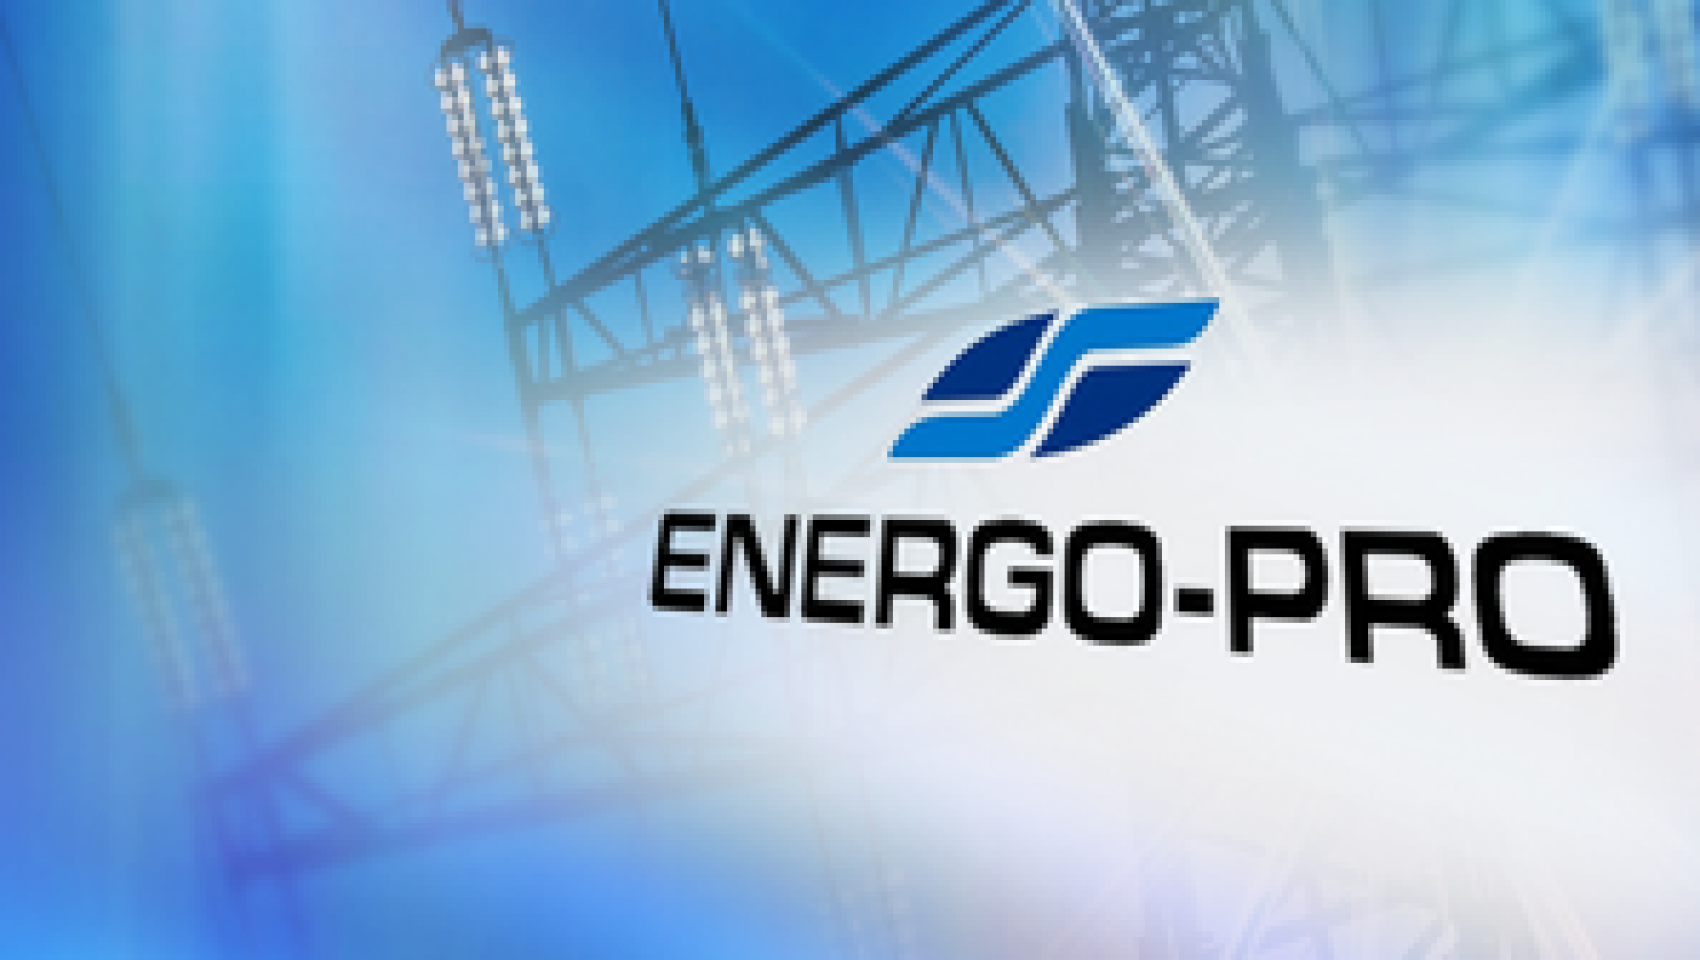 ENERGO-PRO is in an active campaign to update data for